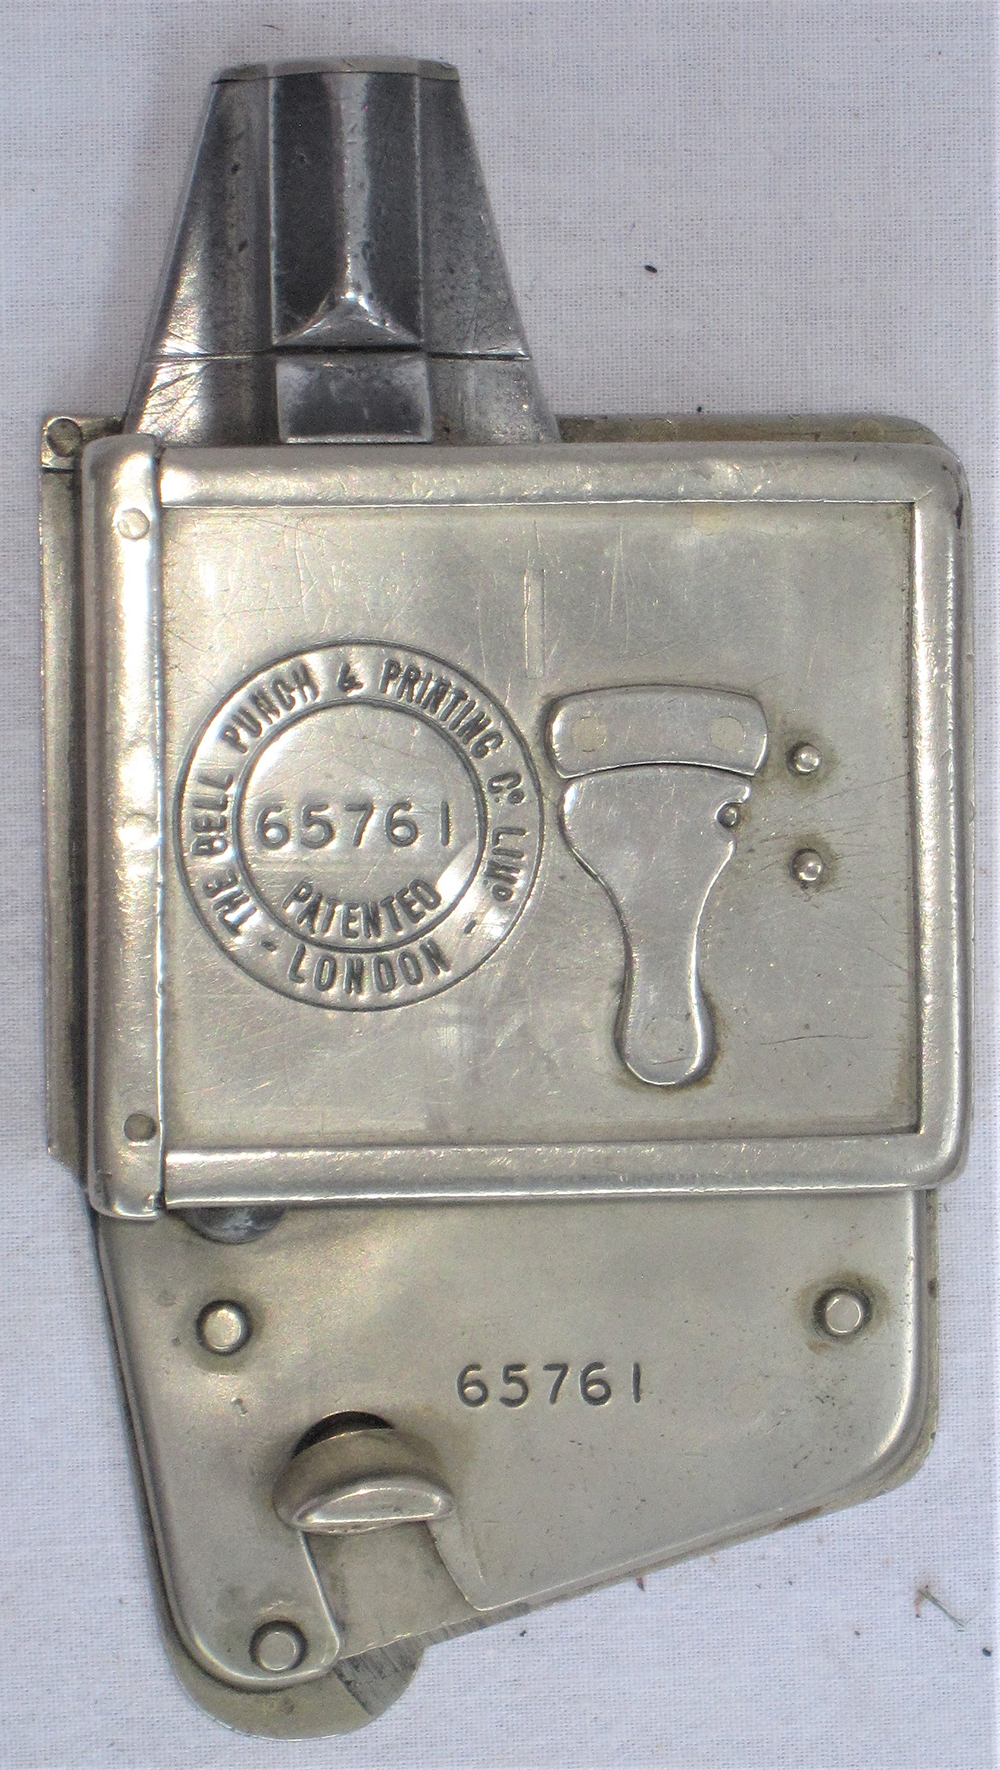 A tram lines or early bus Conductor's TICKET PUNCH made by the BELL and PRINTING CO No 65761. In